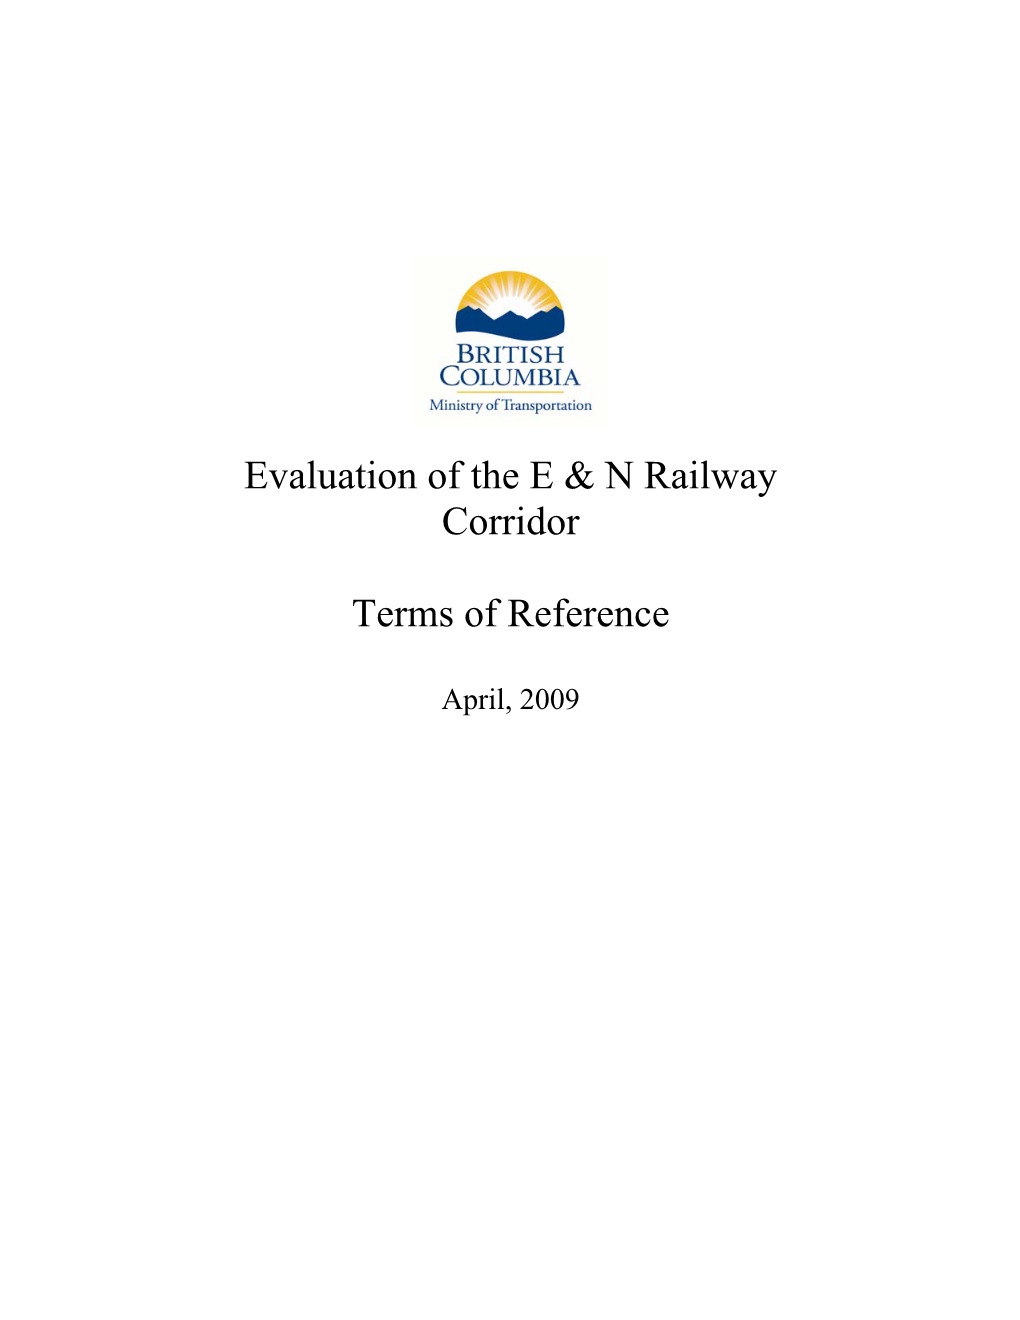 Evaluation of the E&N Railway – Terms of Reference